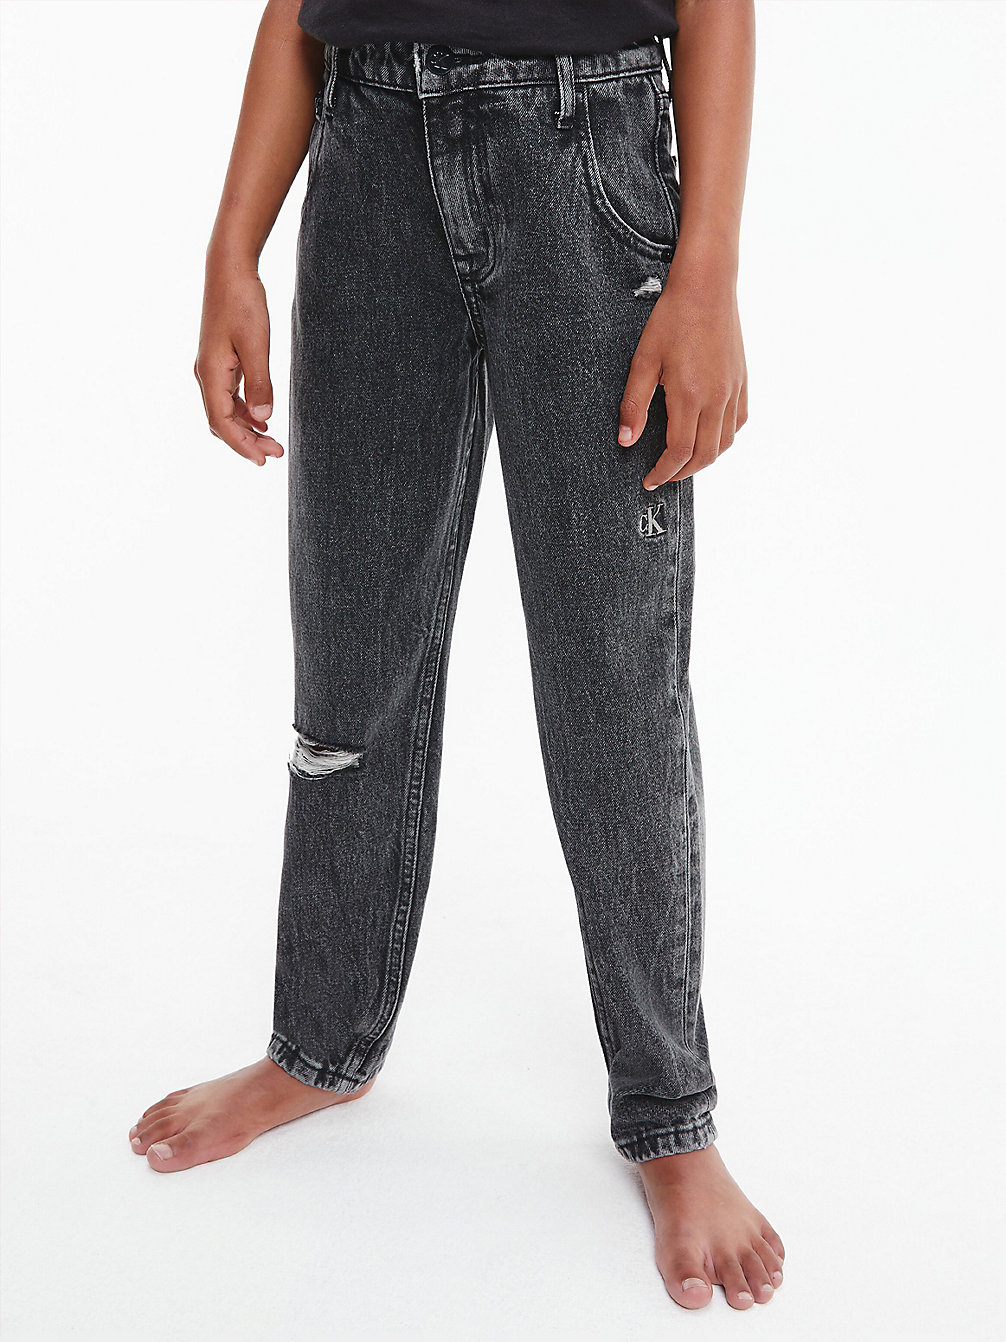 Jean Relaxed Barrel Leg > WASHED STONE GREY BLACK > undefined girls > Calvin Klein